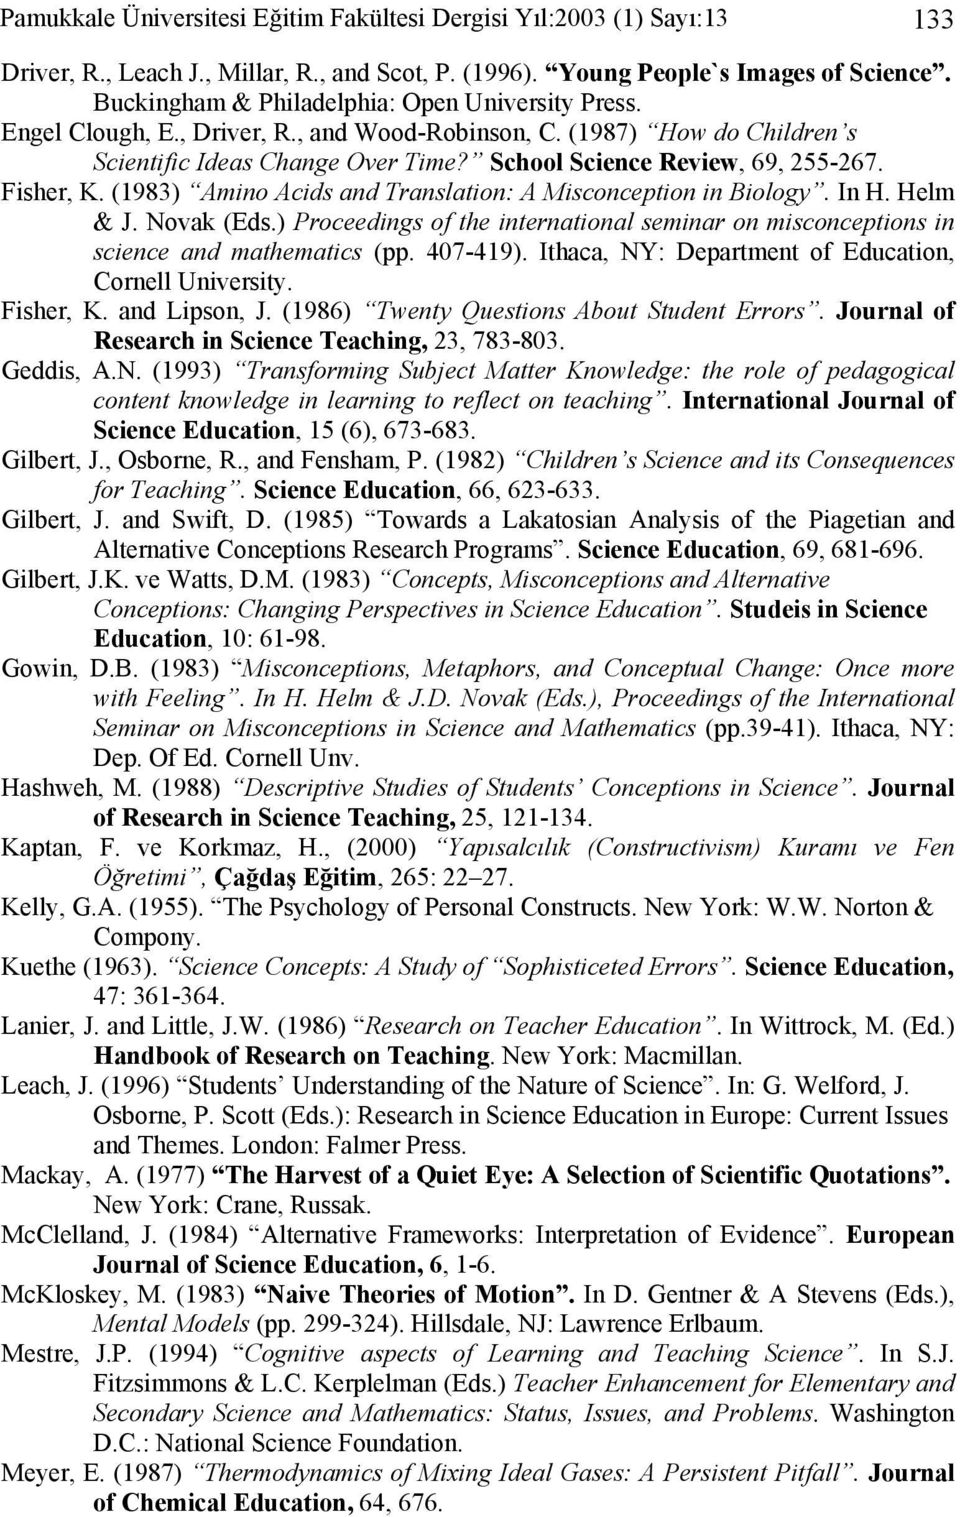 Fisher, K. (1983) Amino Acids and Translation: A Misconception in Biology. In H. Helm & J. Novak (Eds.) Proceedings of the international seminar on misconceptions in science and mathematics (pp.